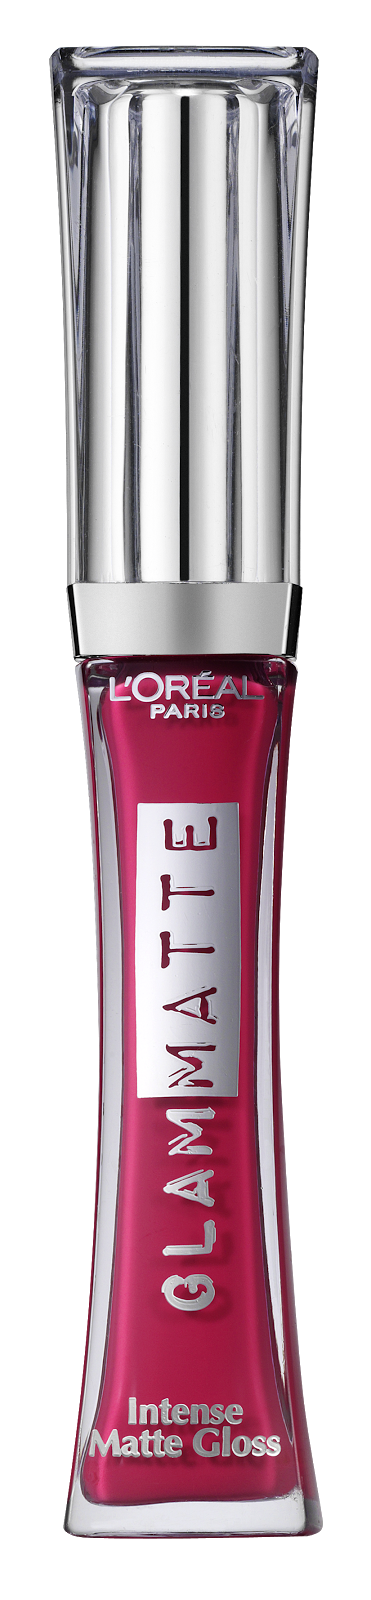 [Preview] Loreal Glam Matte